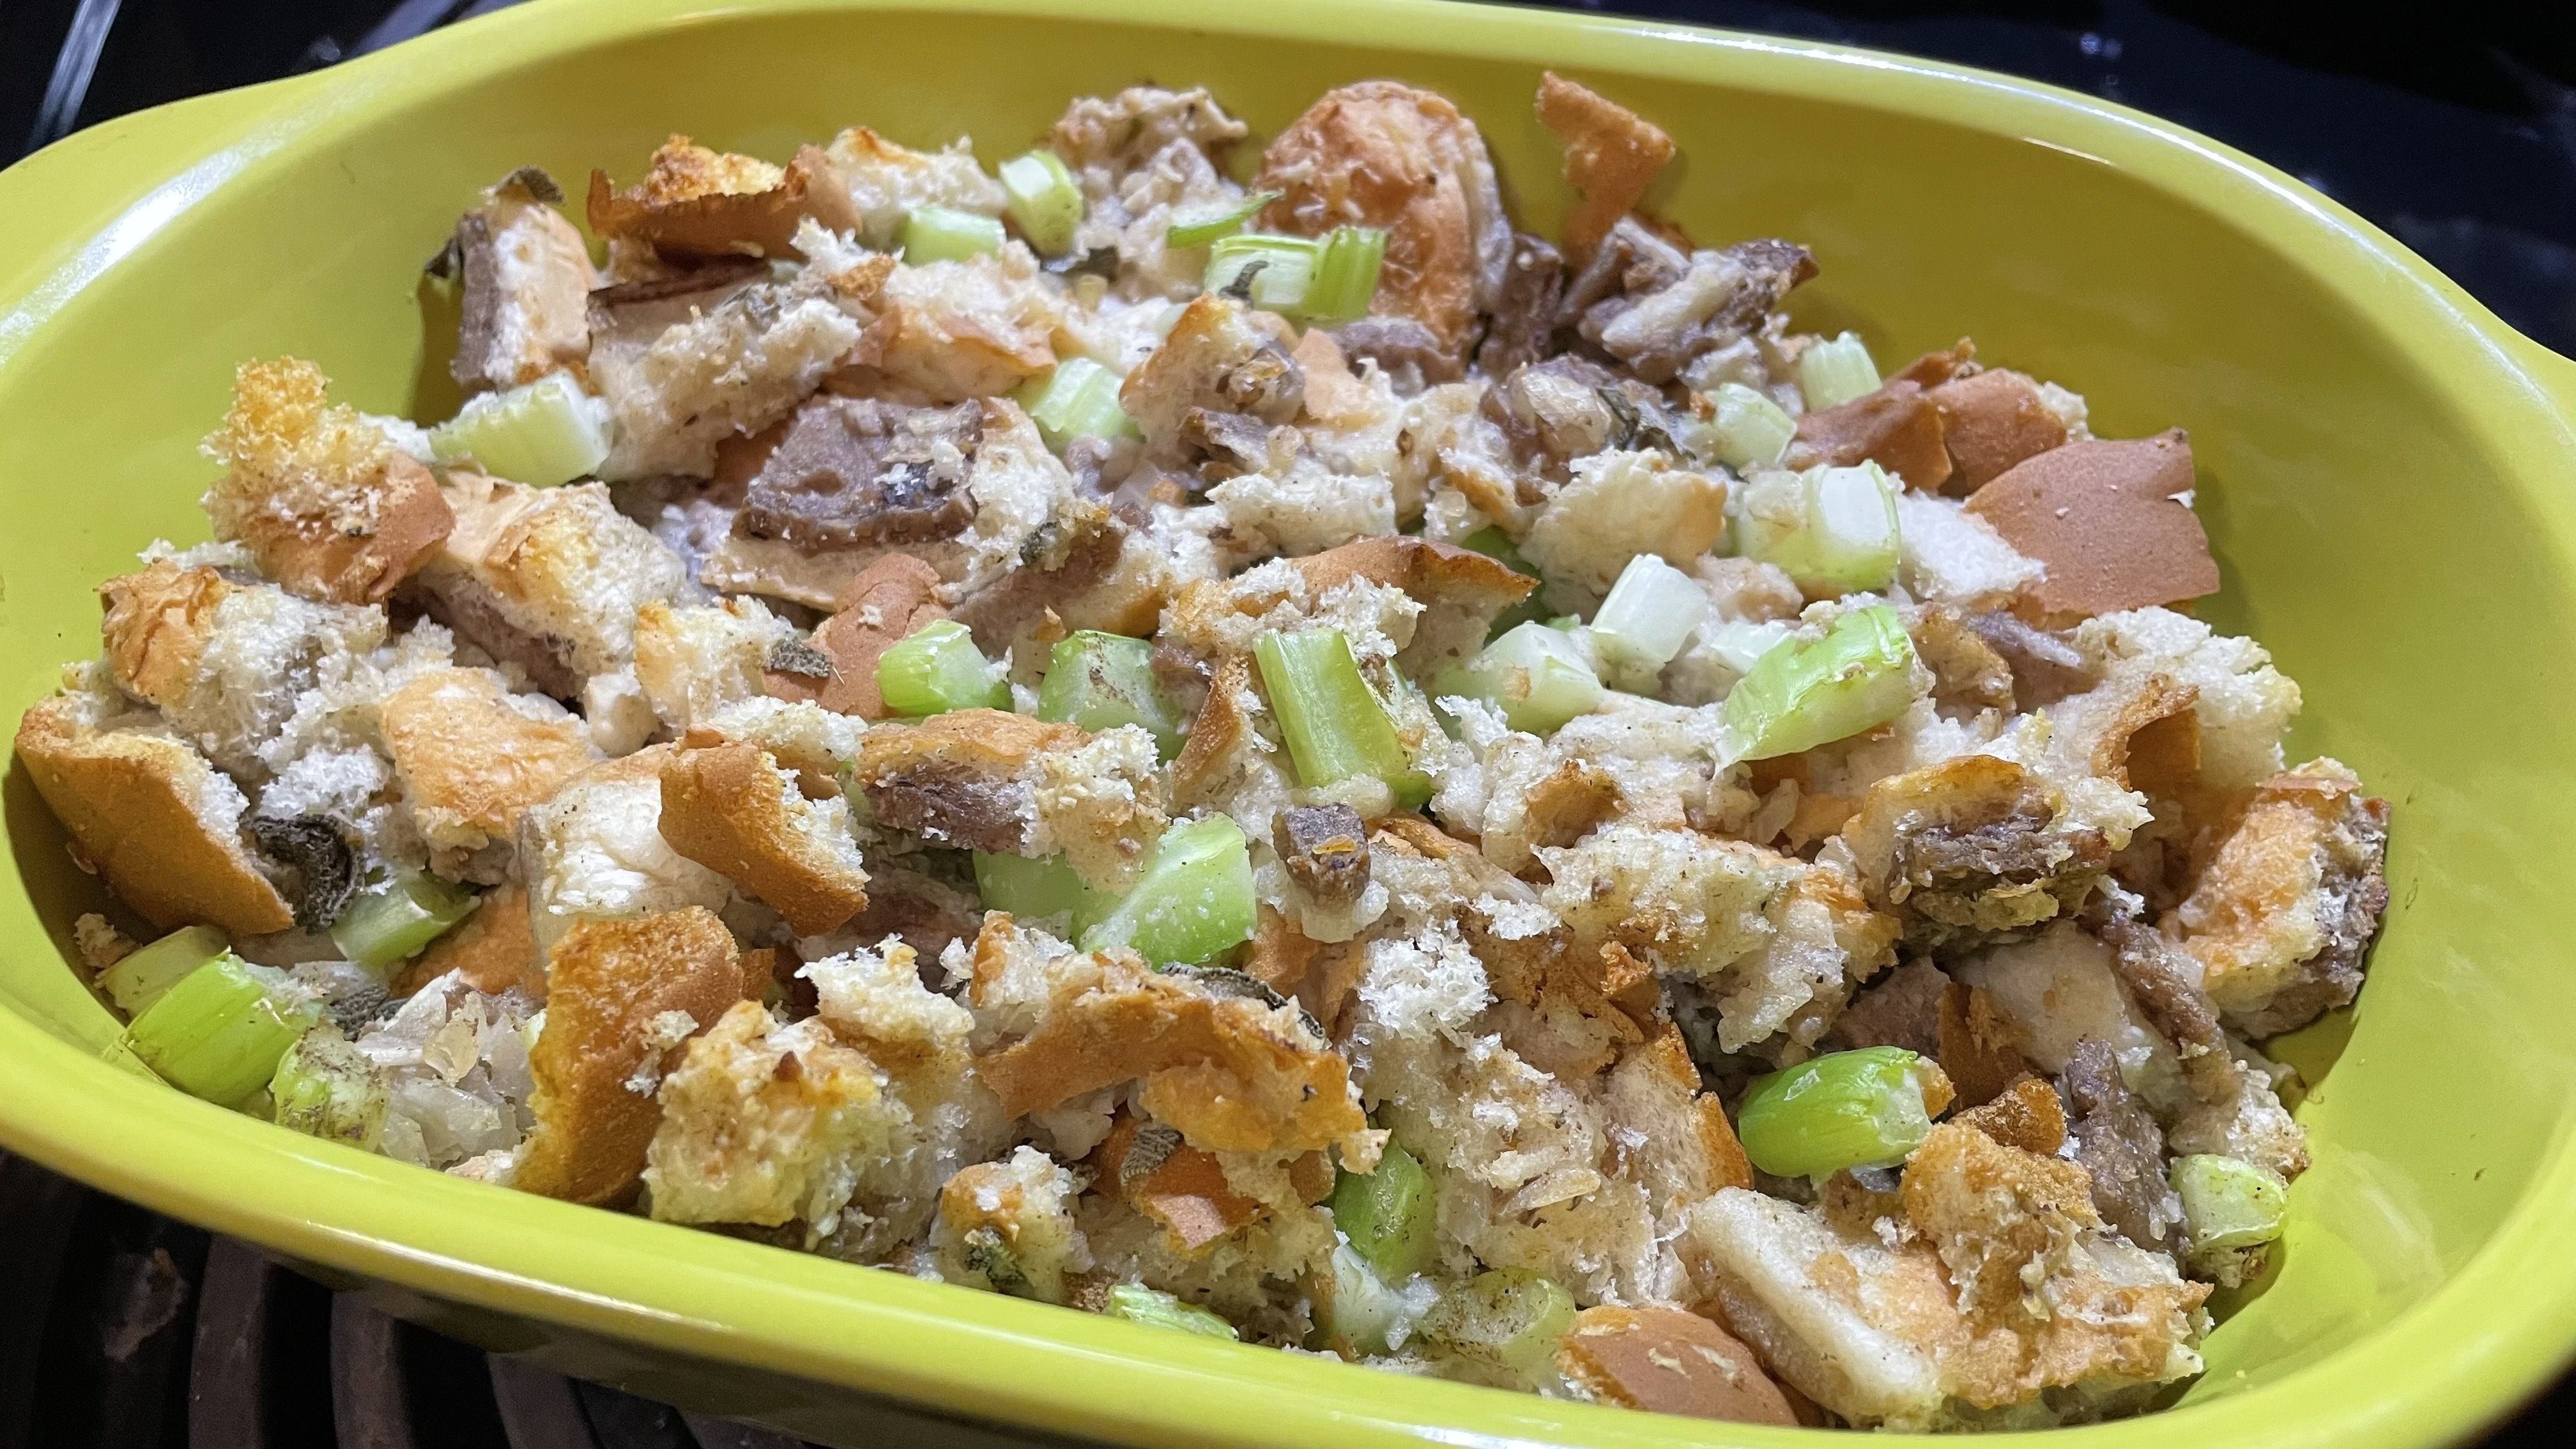 stuffing in a green bowl